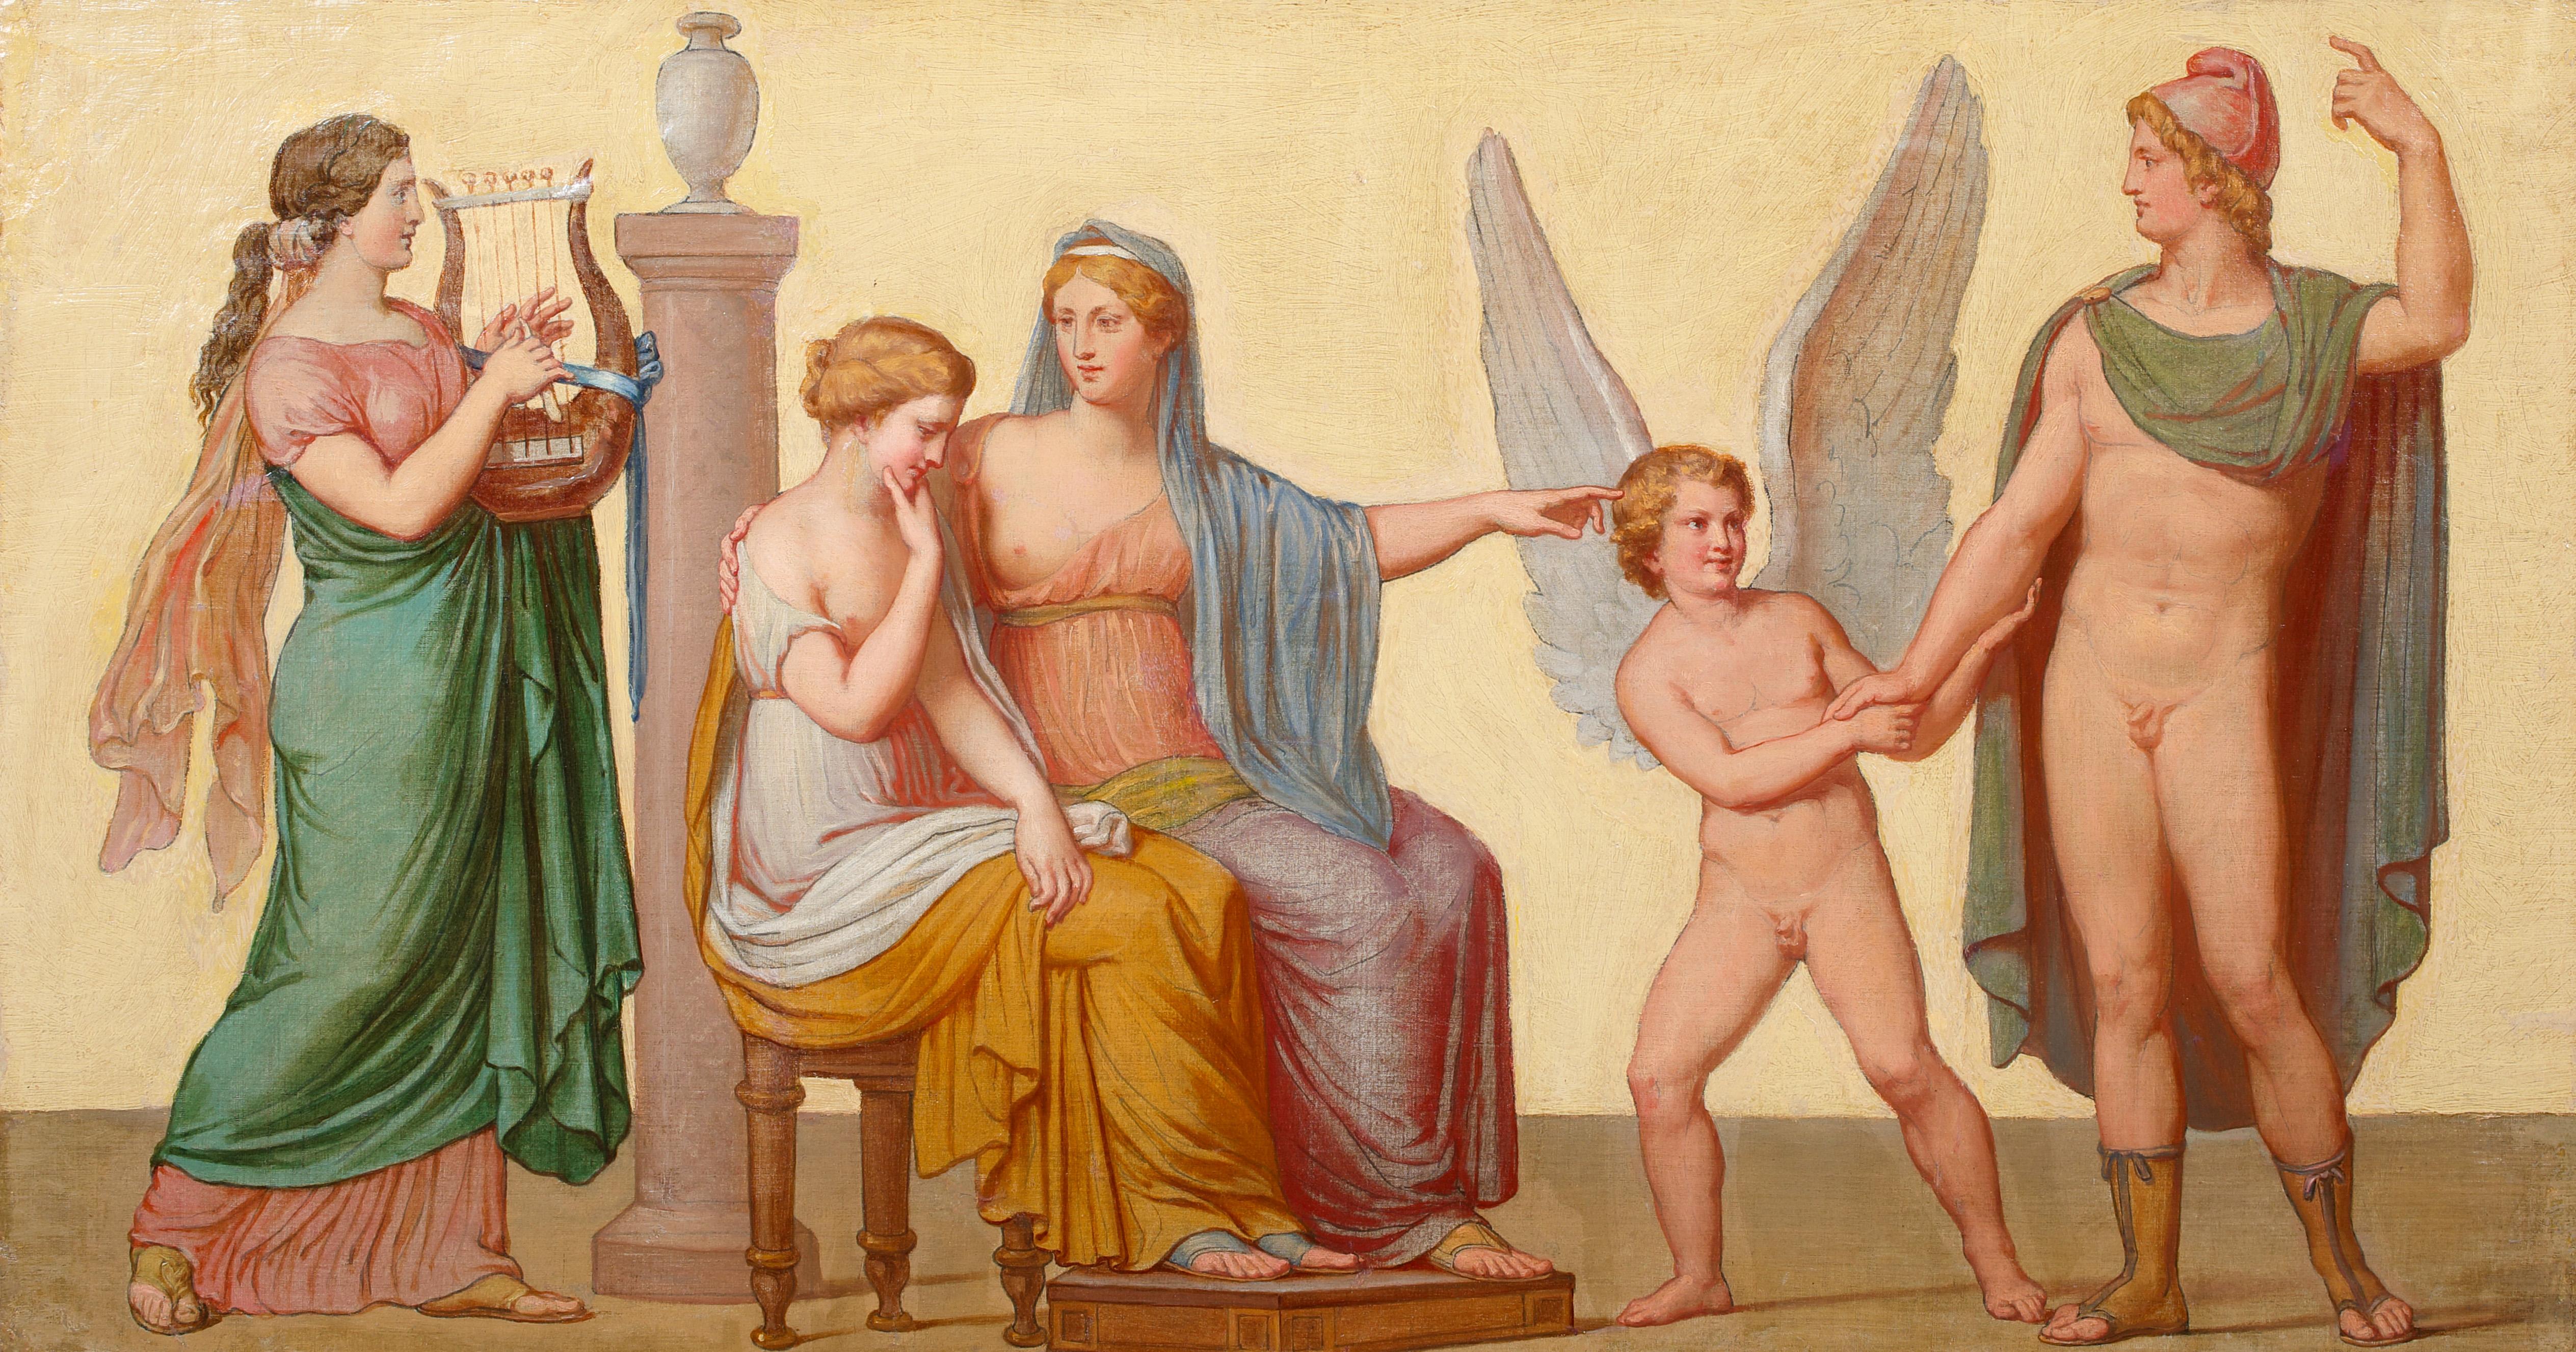 The Roman Gods In An Allegory Of Love, 18th Century  Italian School  - Painting by Unknown